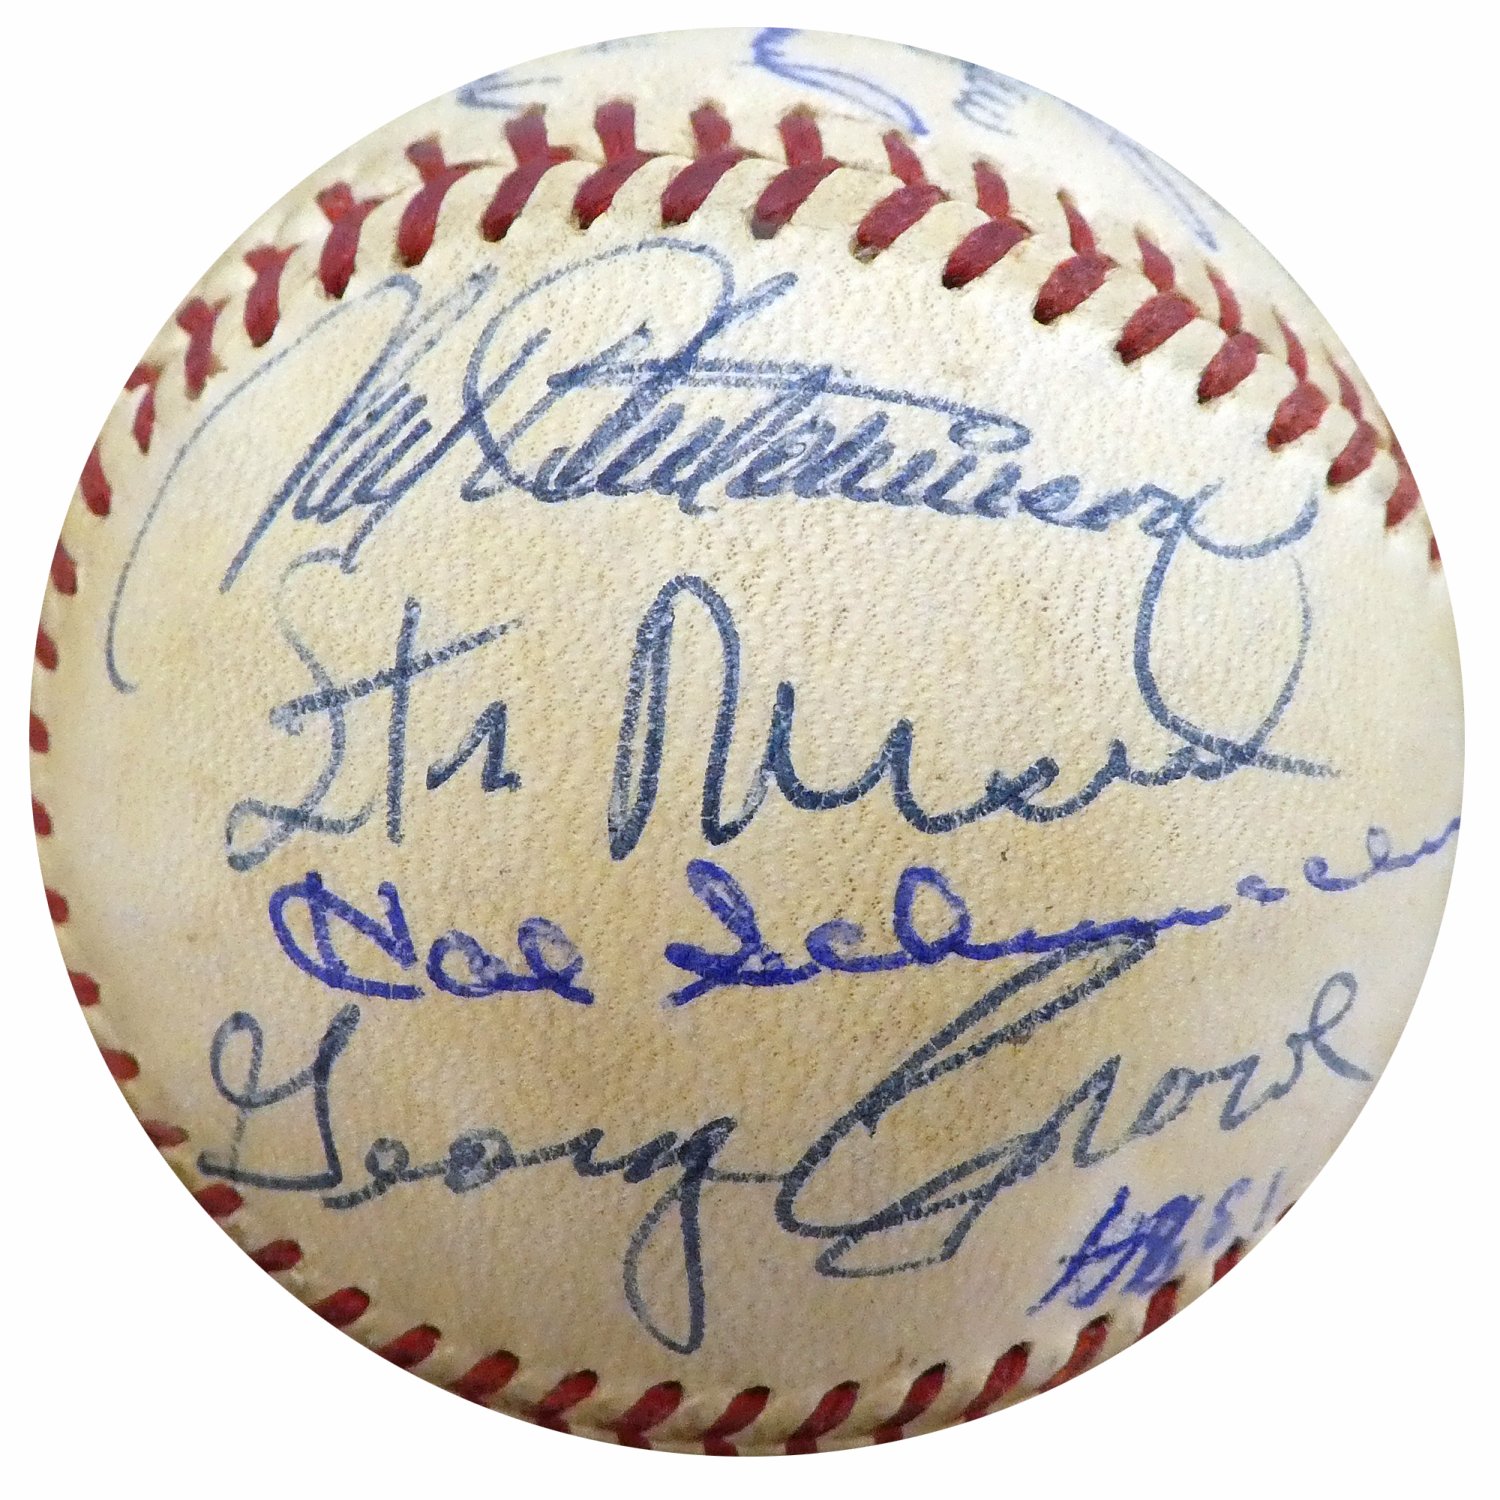 Stan Musial Autographed Signed 1960 St. Louis Cardinals